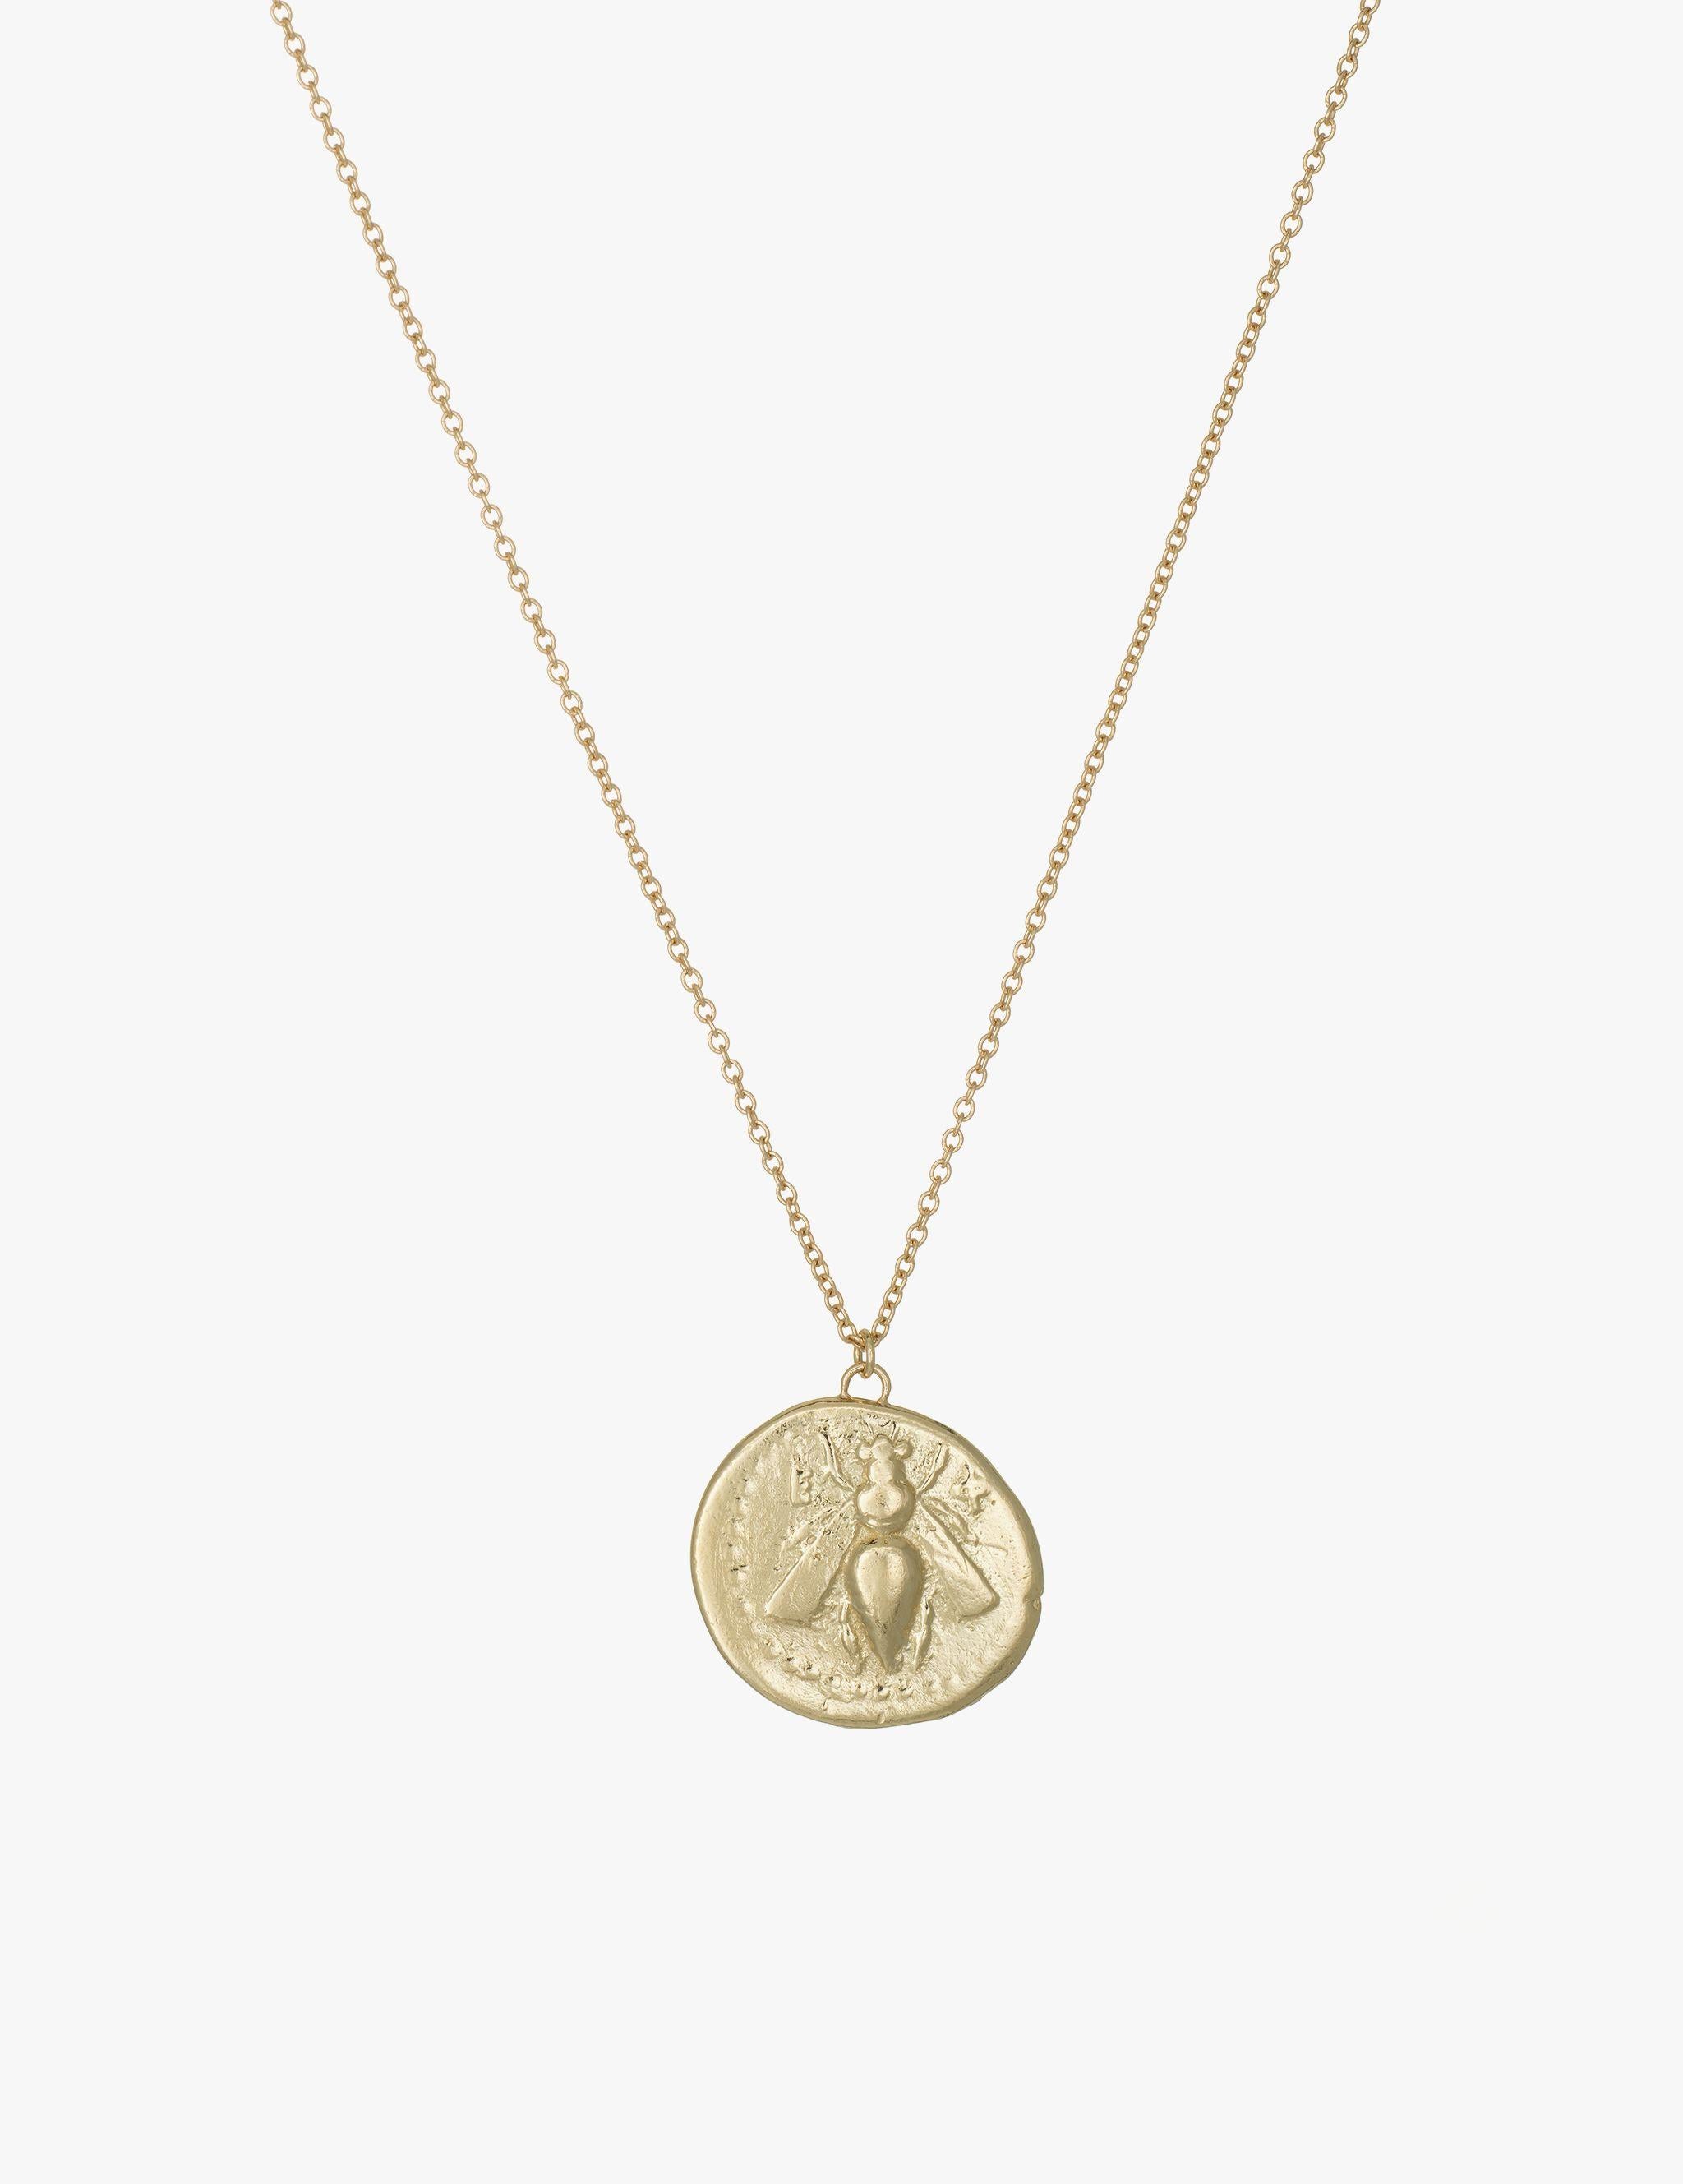 Honey bee and stag coin in 14k gold on 18” chain. Molded from an ancient Greek coin. One side depicts a bee, the symbol of the goddess Artemis. The reverse shows the stag – an animal sacred to Artemis – symbolizing the goddess' role as protector of